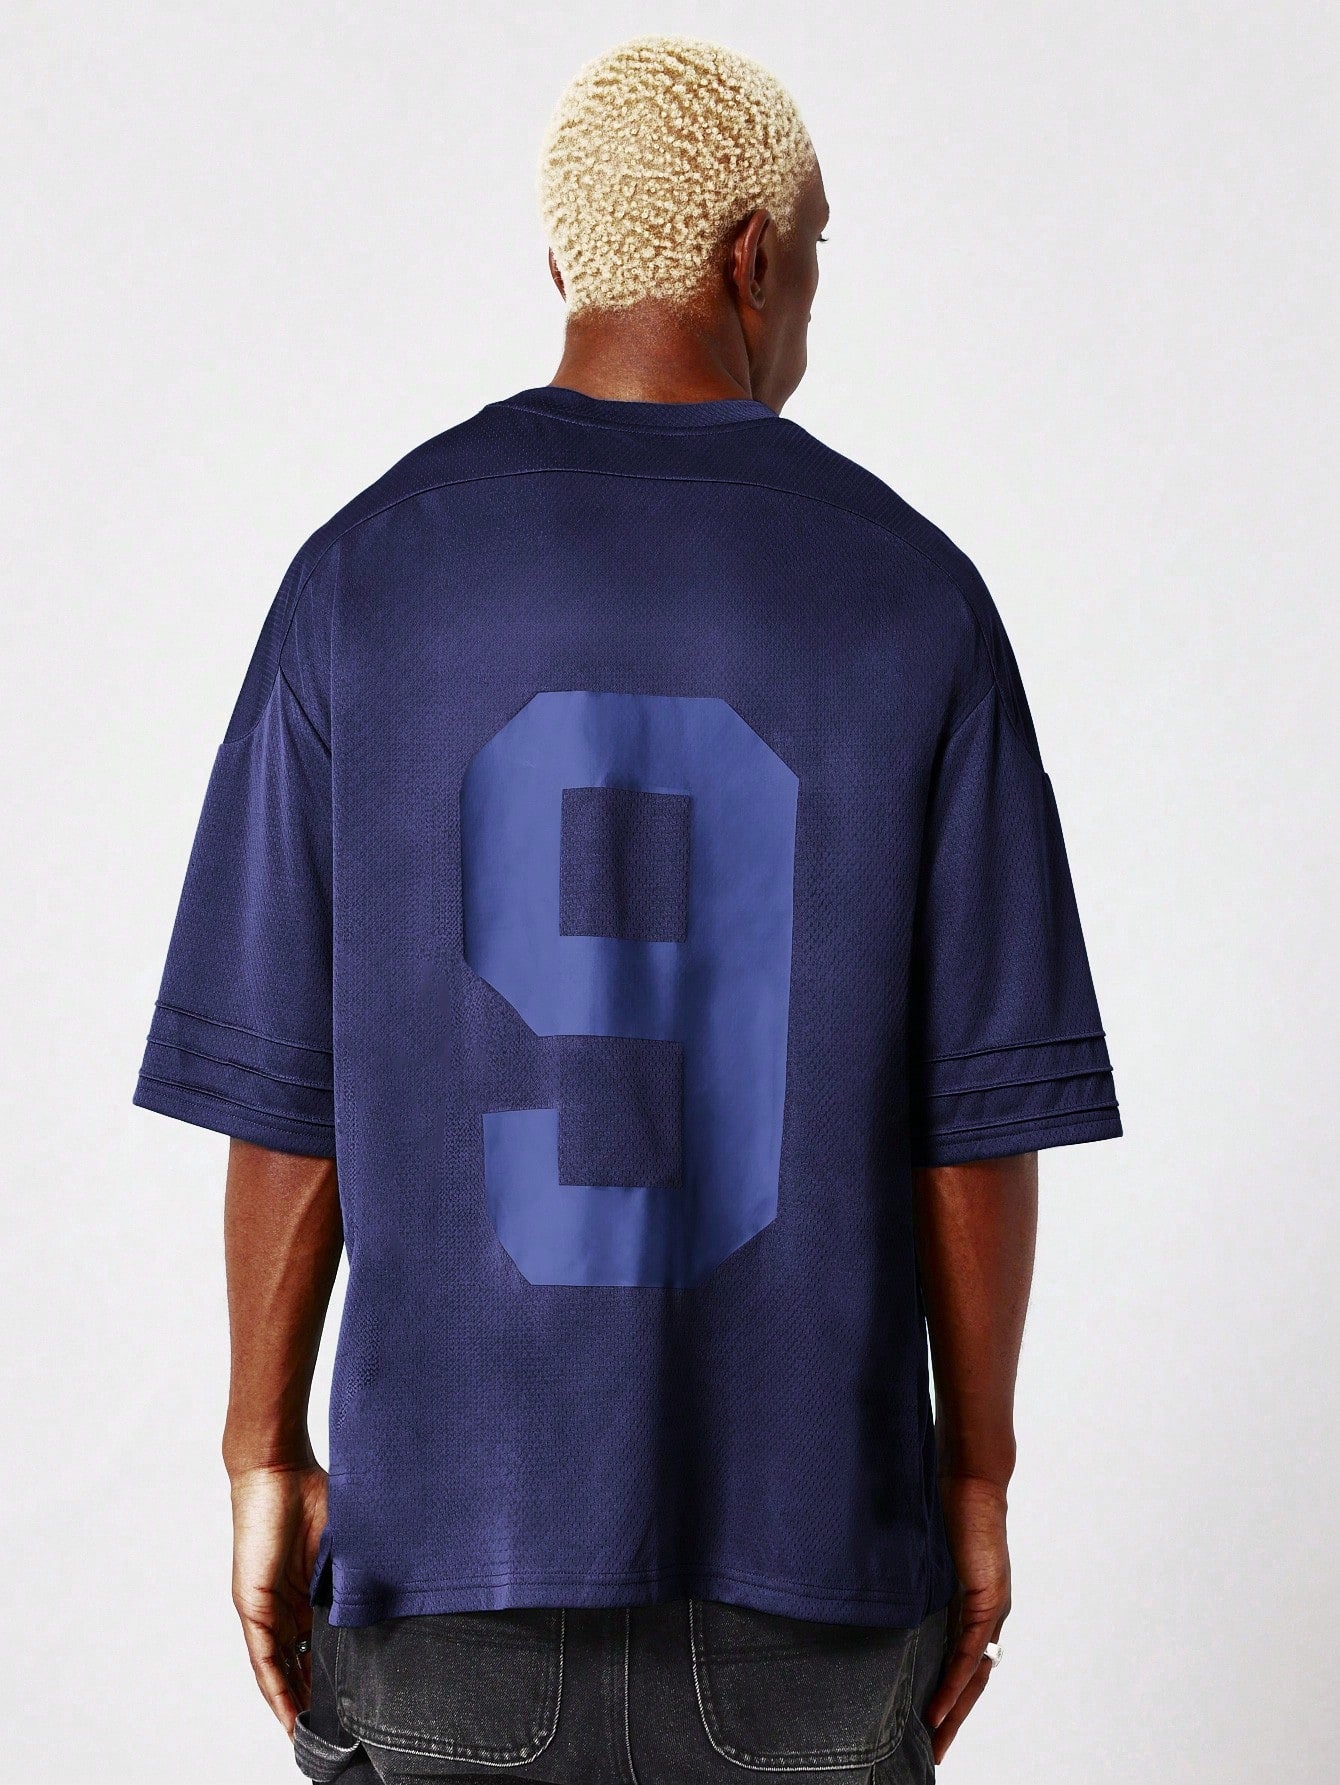 Oversized Fit Hockey Tee With Number Graphic Print College Ready